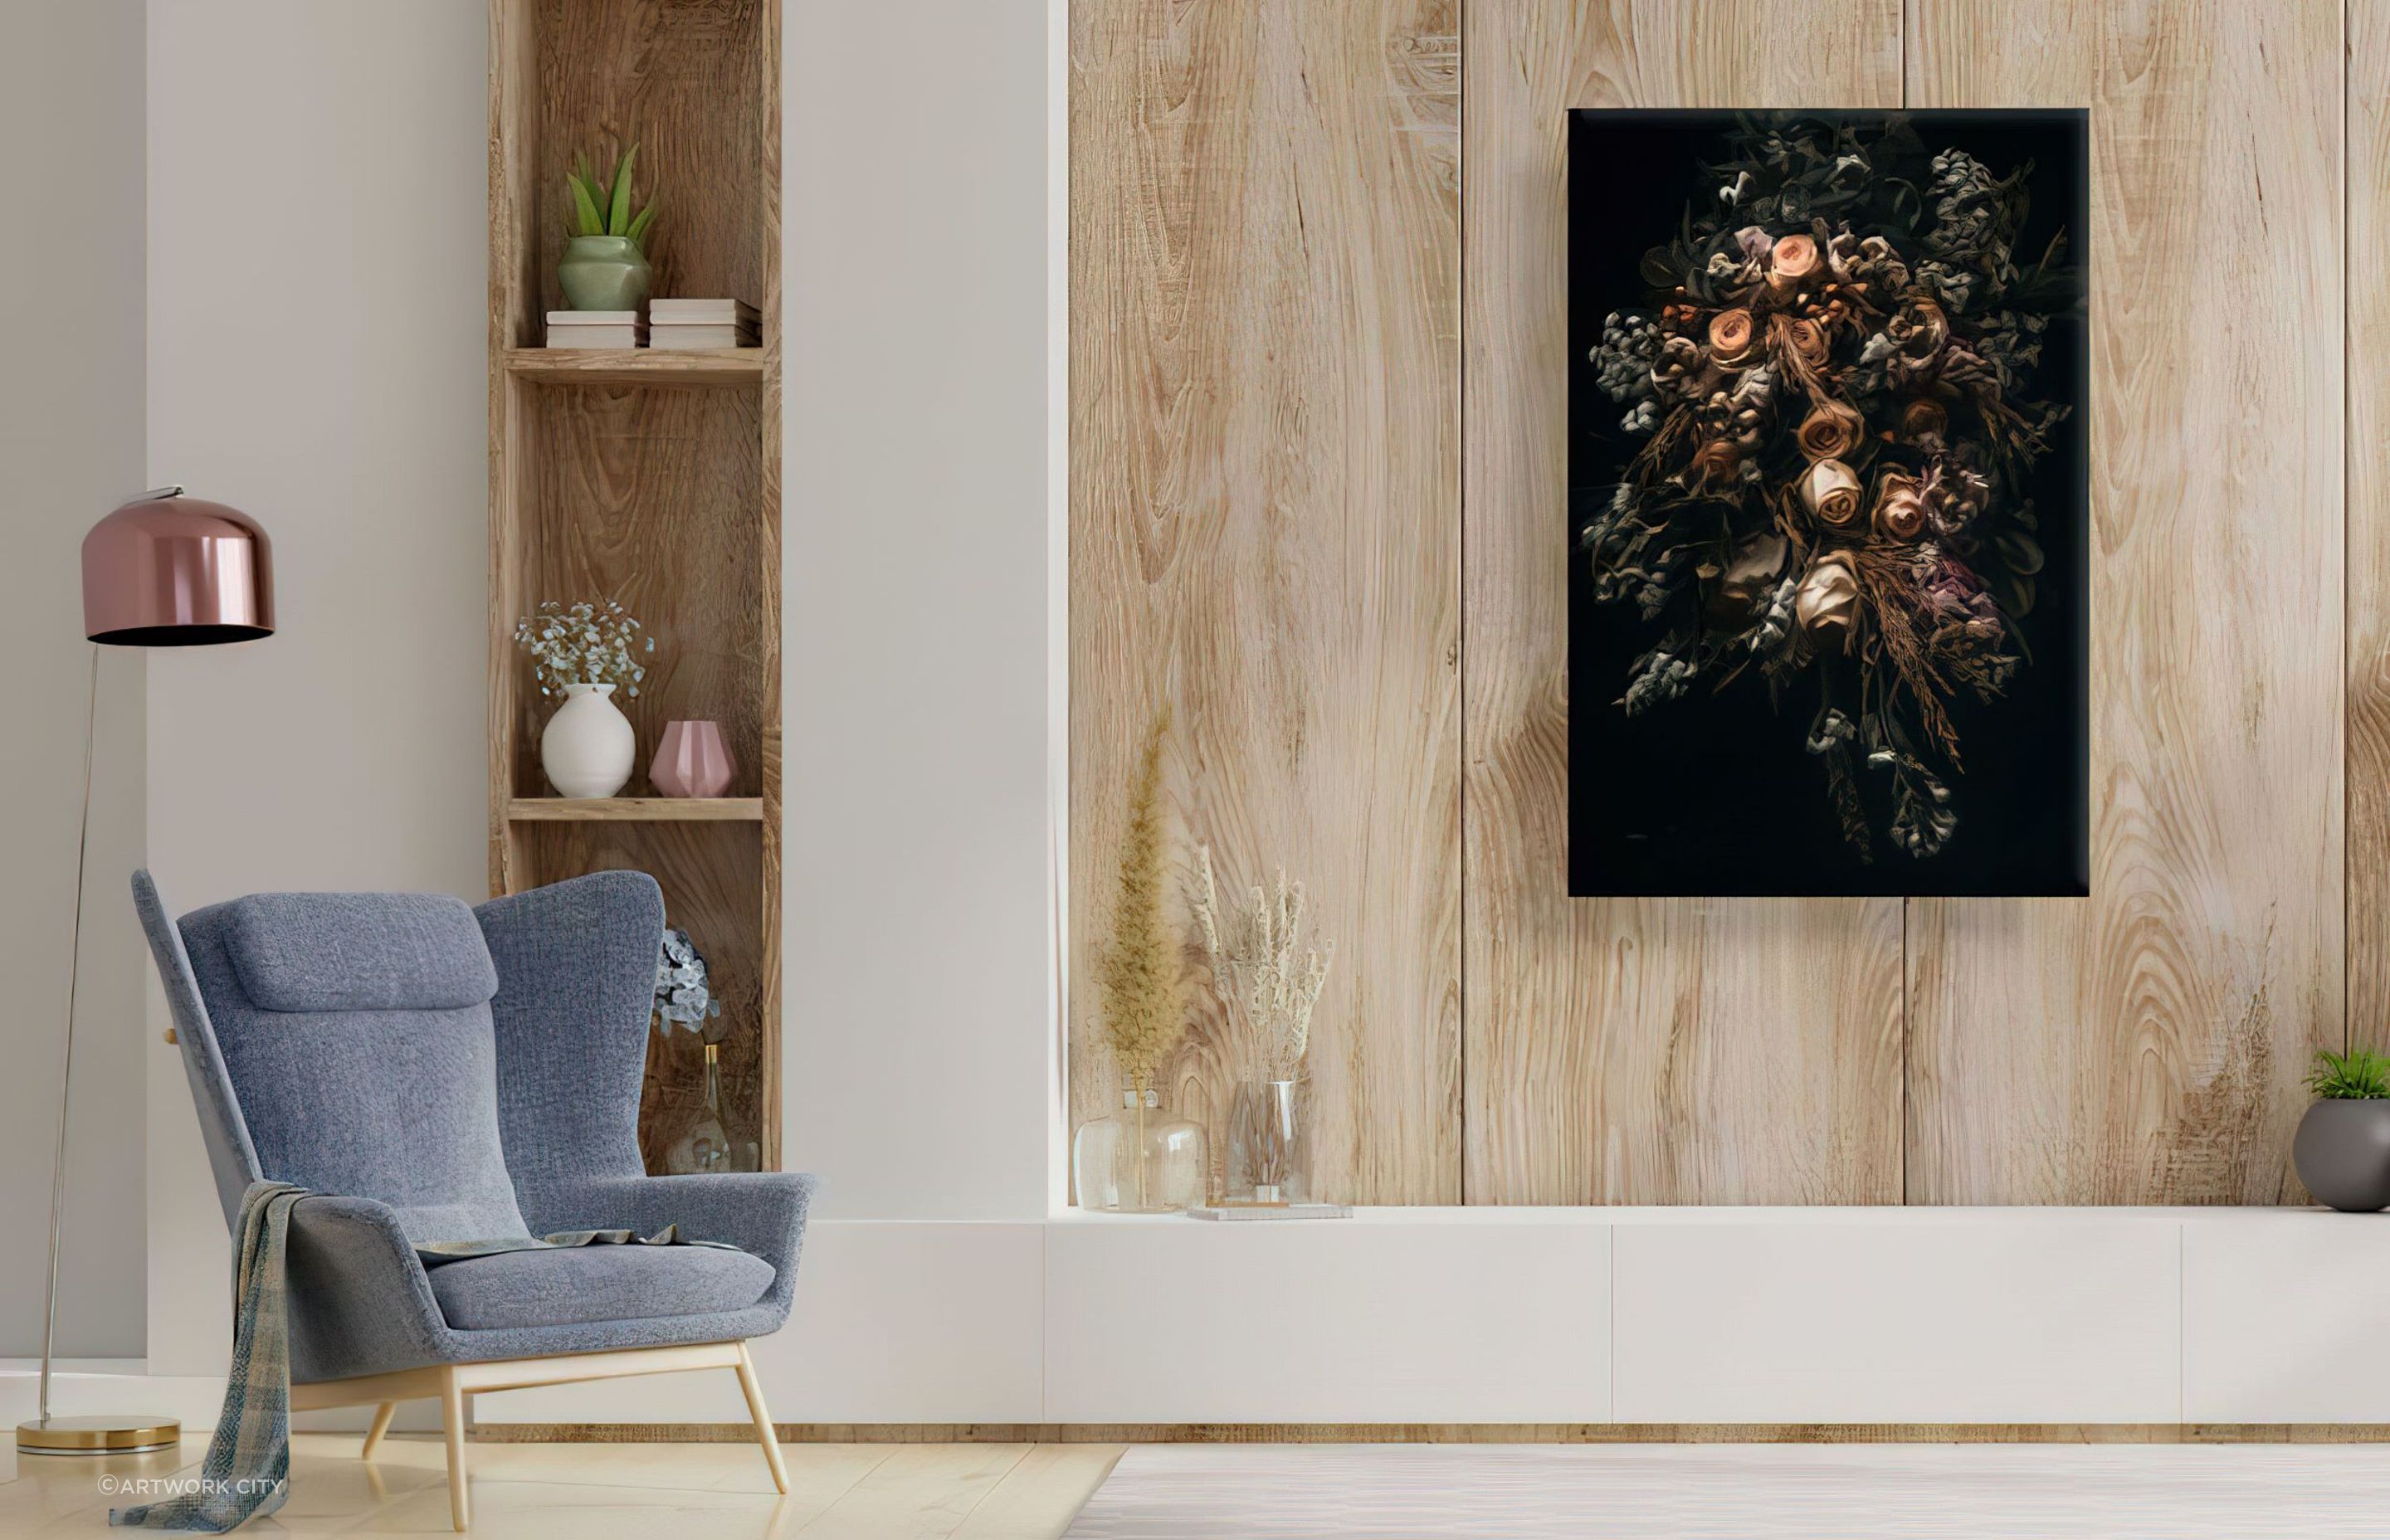 Wall art is a great way to inject some expression into a living space, seen here with the beautiful Berthe - Sierrafleur.